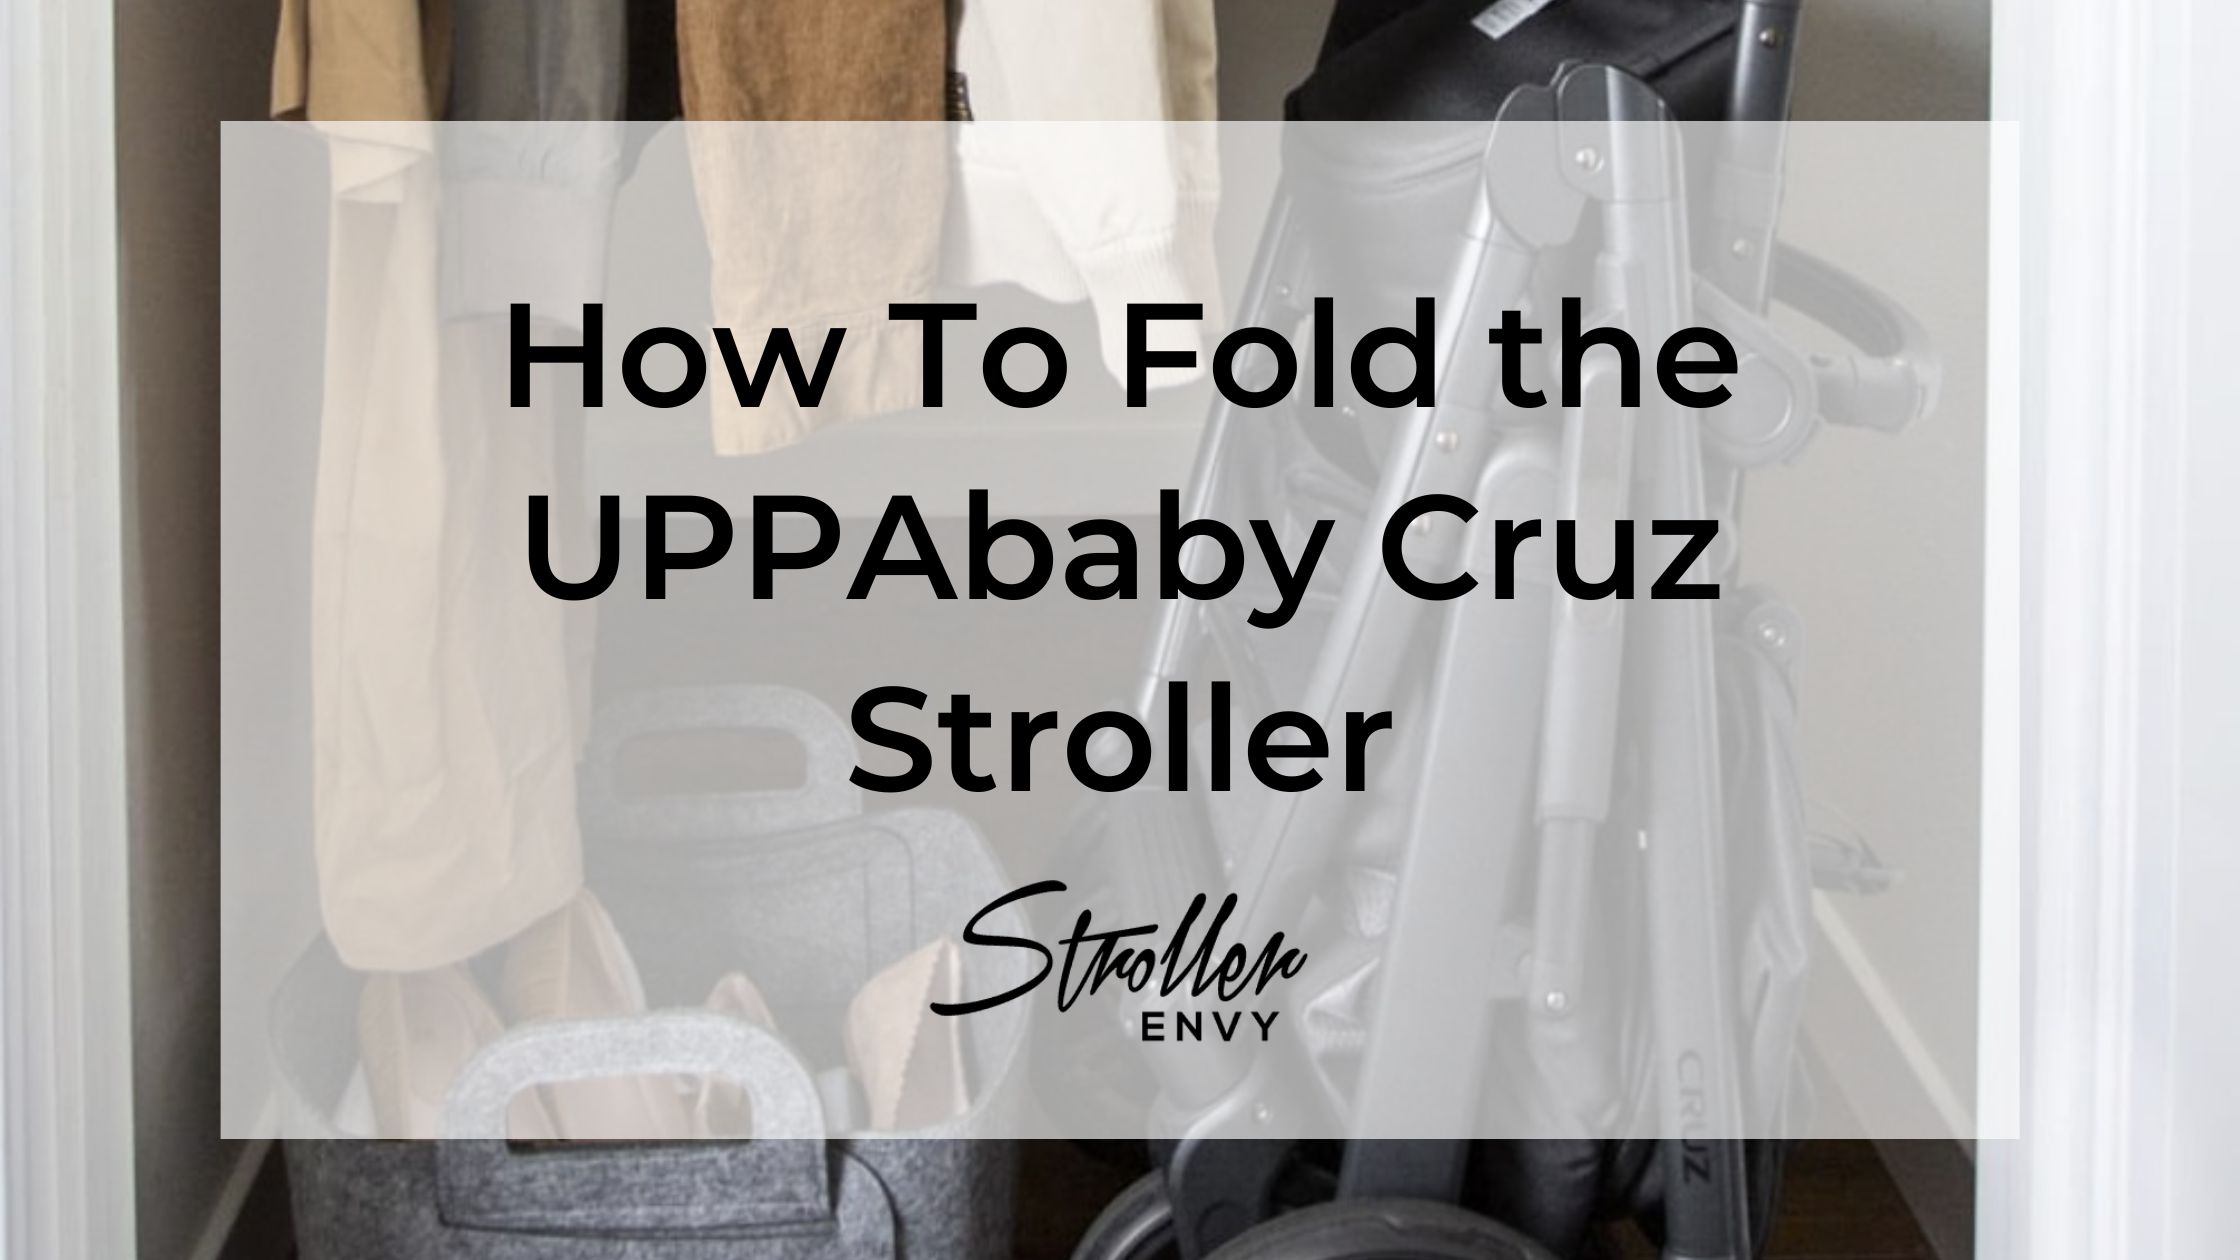 How To Fold the UPPAbaby Cruz